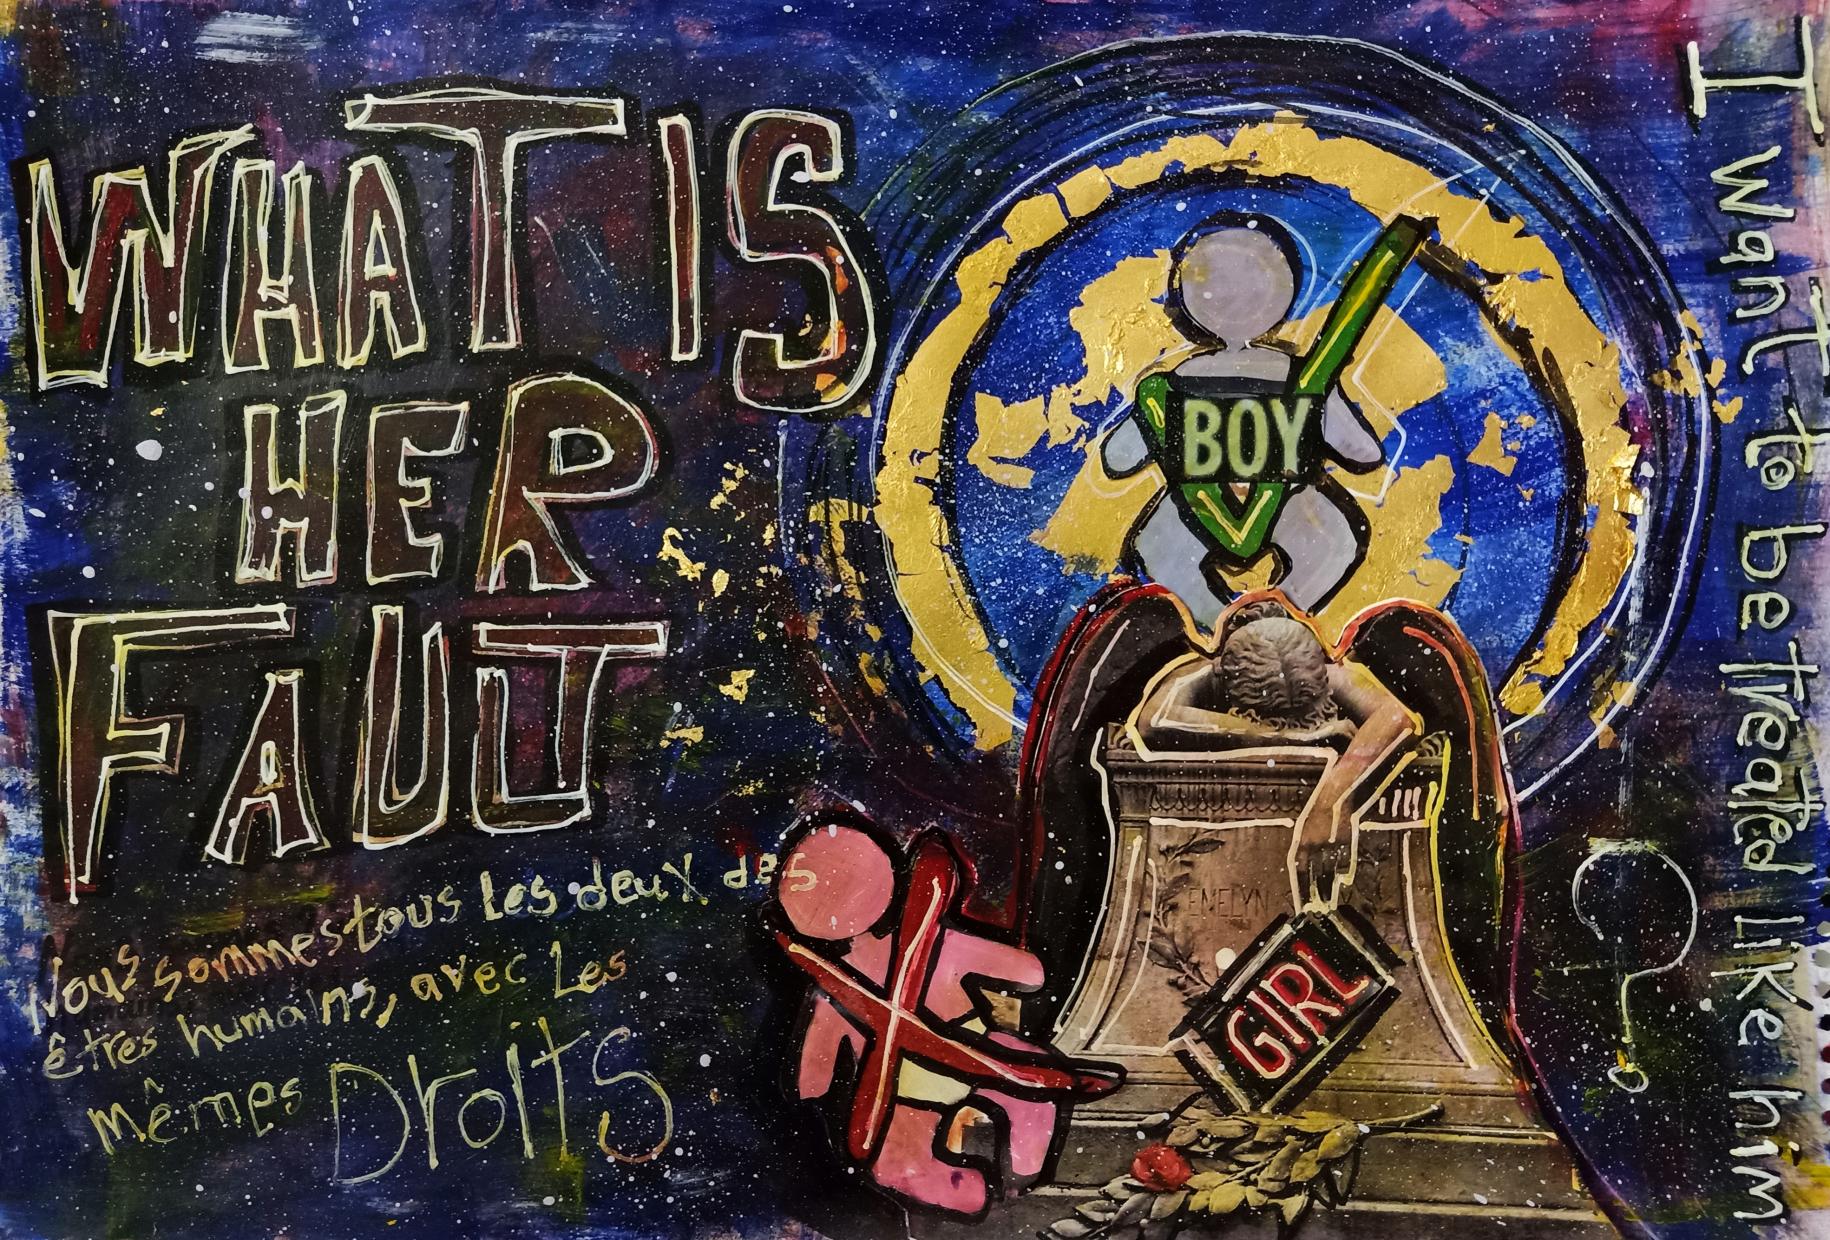 Artwork shows the harm of sex selection through the use of images of boy with a check and girls with an X and messages of emphasizing the dangers of the practice.